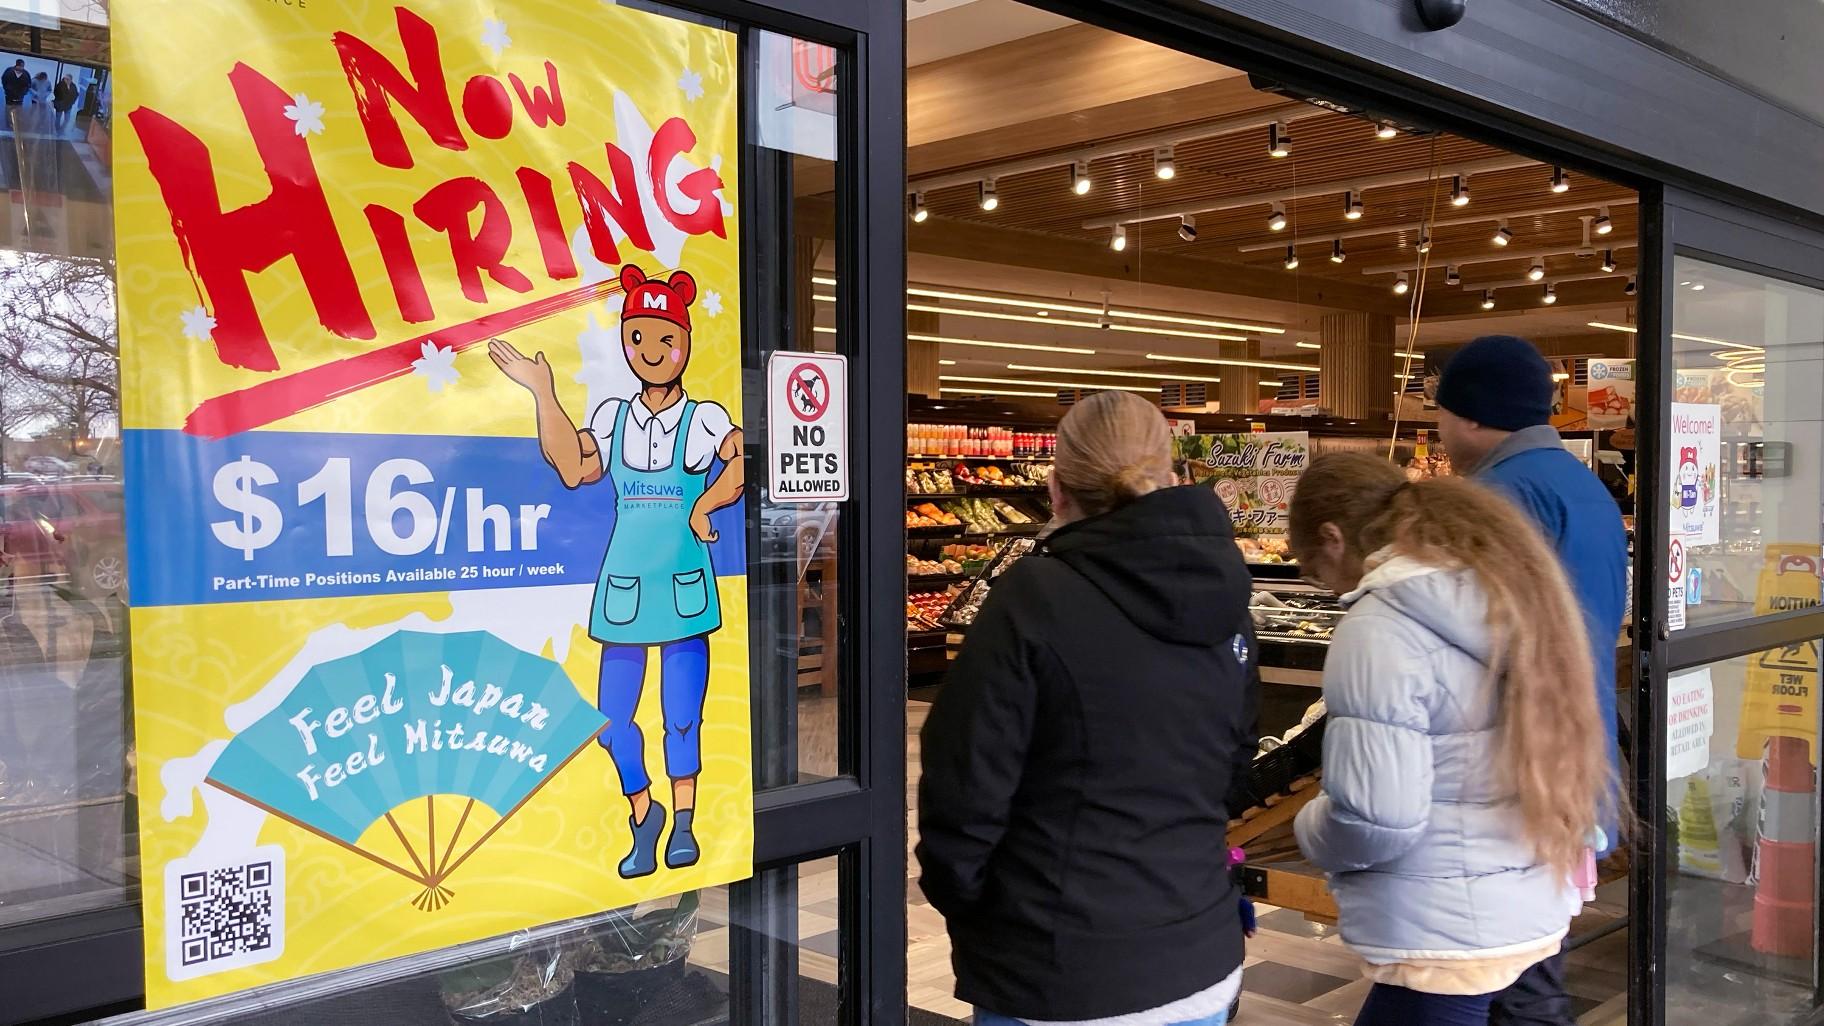 A hiring sign is displayed at a grocery store in Arlington Heights, Ill., Friday, Jan. 13, 2023. (AP Photo / Nam Y. Huh, File)